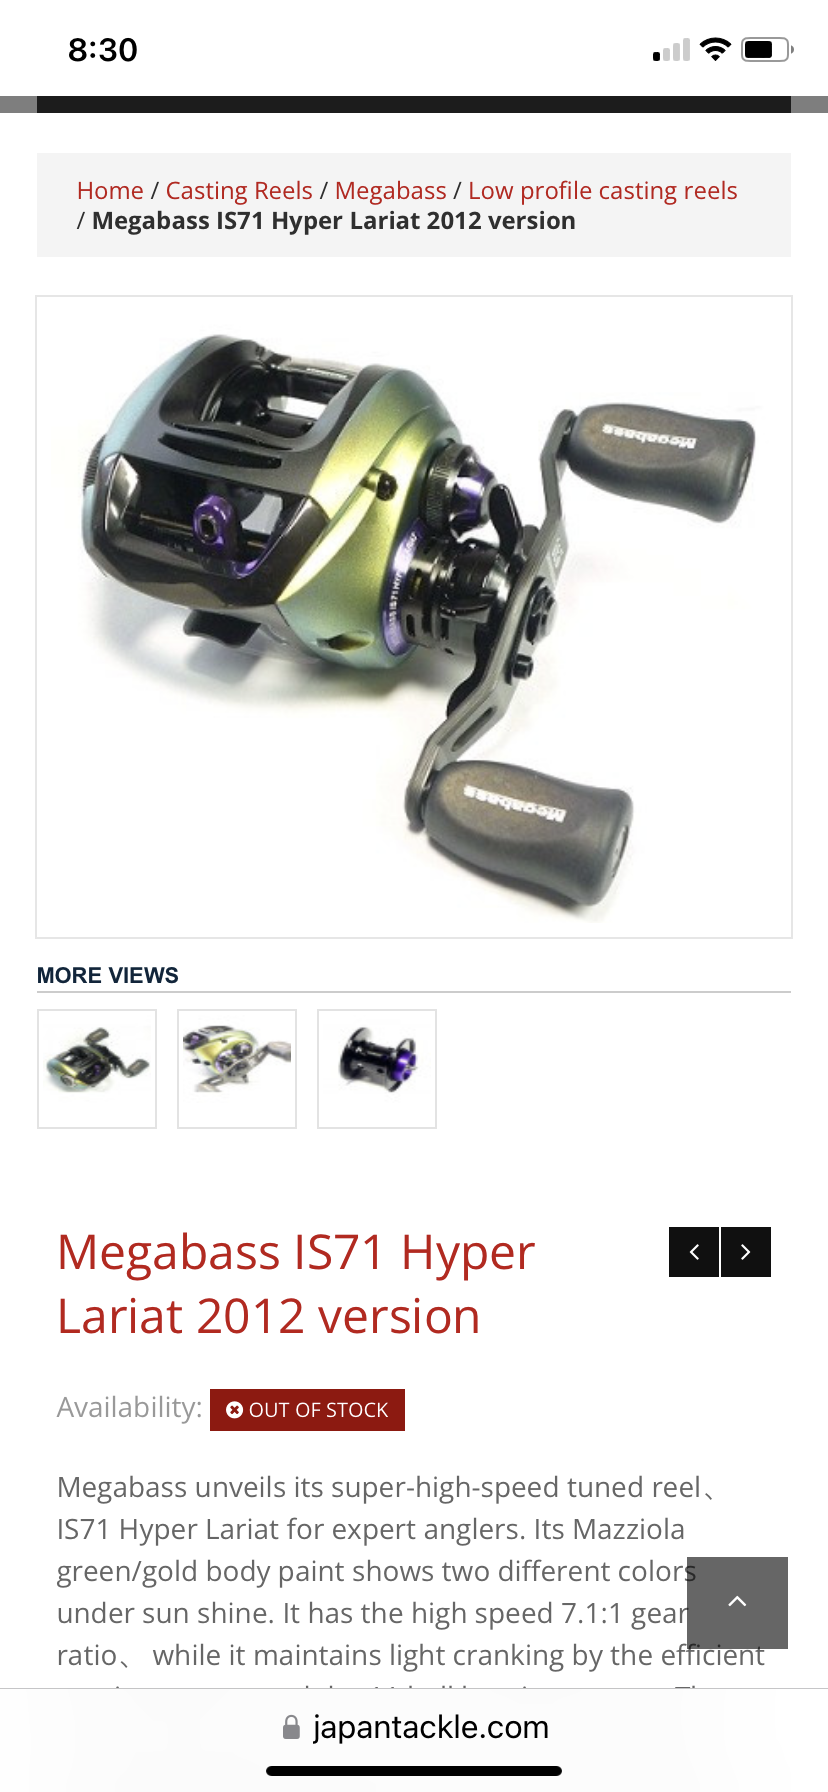 Megabass IS71 Hyper Lariat – All other JDM and enthusiast-level 